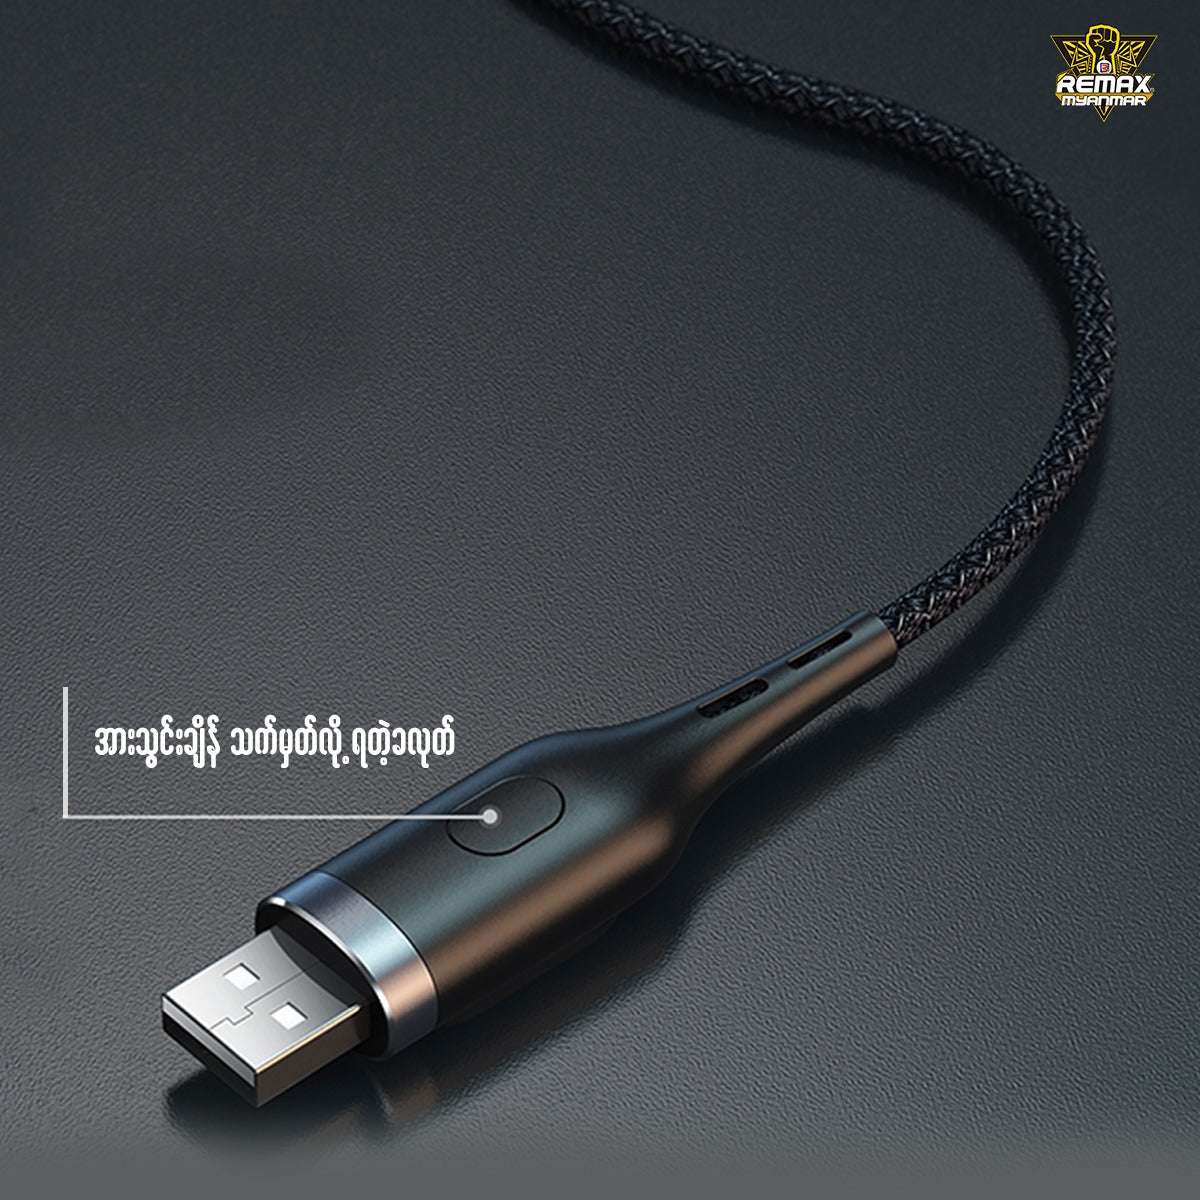 REMAX RC-096I LEADER SMART DISPLAY 2.1A DATA CABLE FOR LIGHTNING,Lightning Cable,iPhone Data Cable,iPhone Charging Cable,iPhone Lightning charging cable ,Best lightning cable for iPhone,Apple iPhone Cable,iPhone USB Cable,Apple Lightning to USB Cable